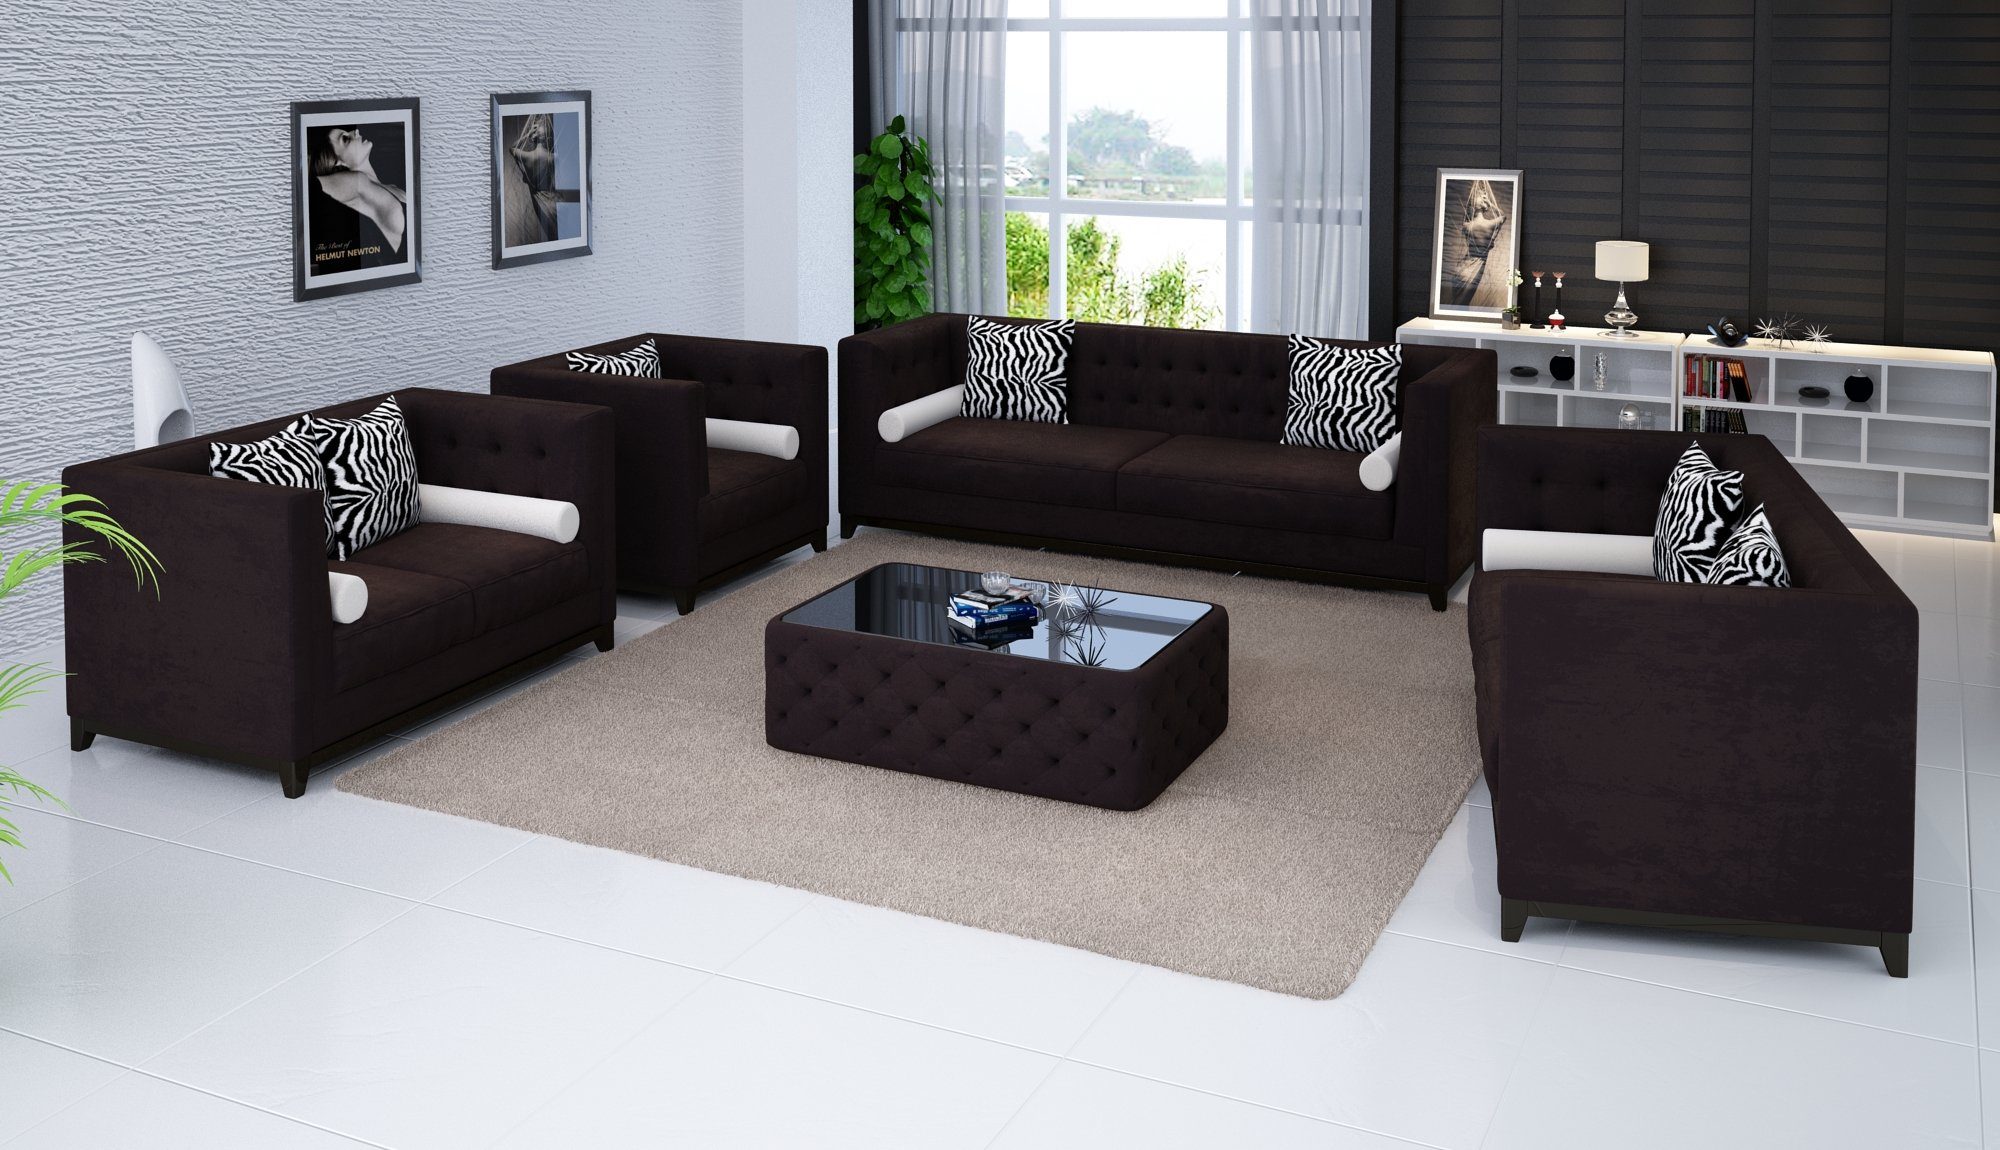 Sessel, in Chesterfield Sofa Sofagarnitur JVmoebel Couchen 3tlg Sofa Braun Couch Rote Europe Made